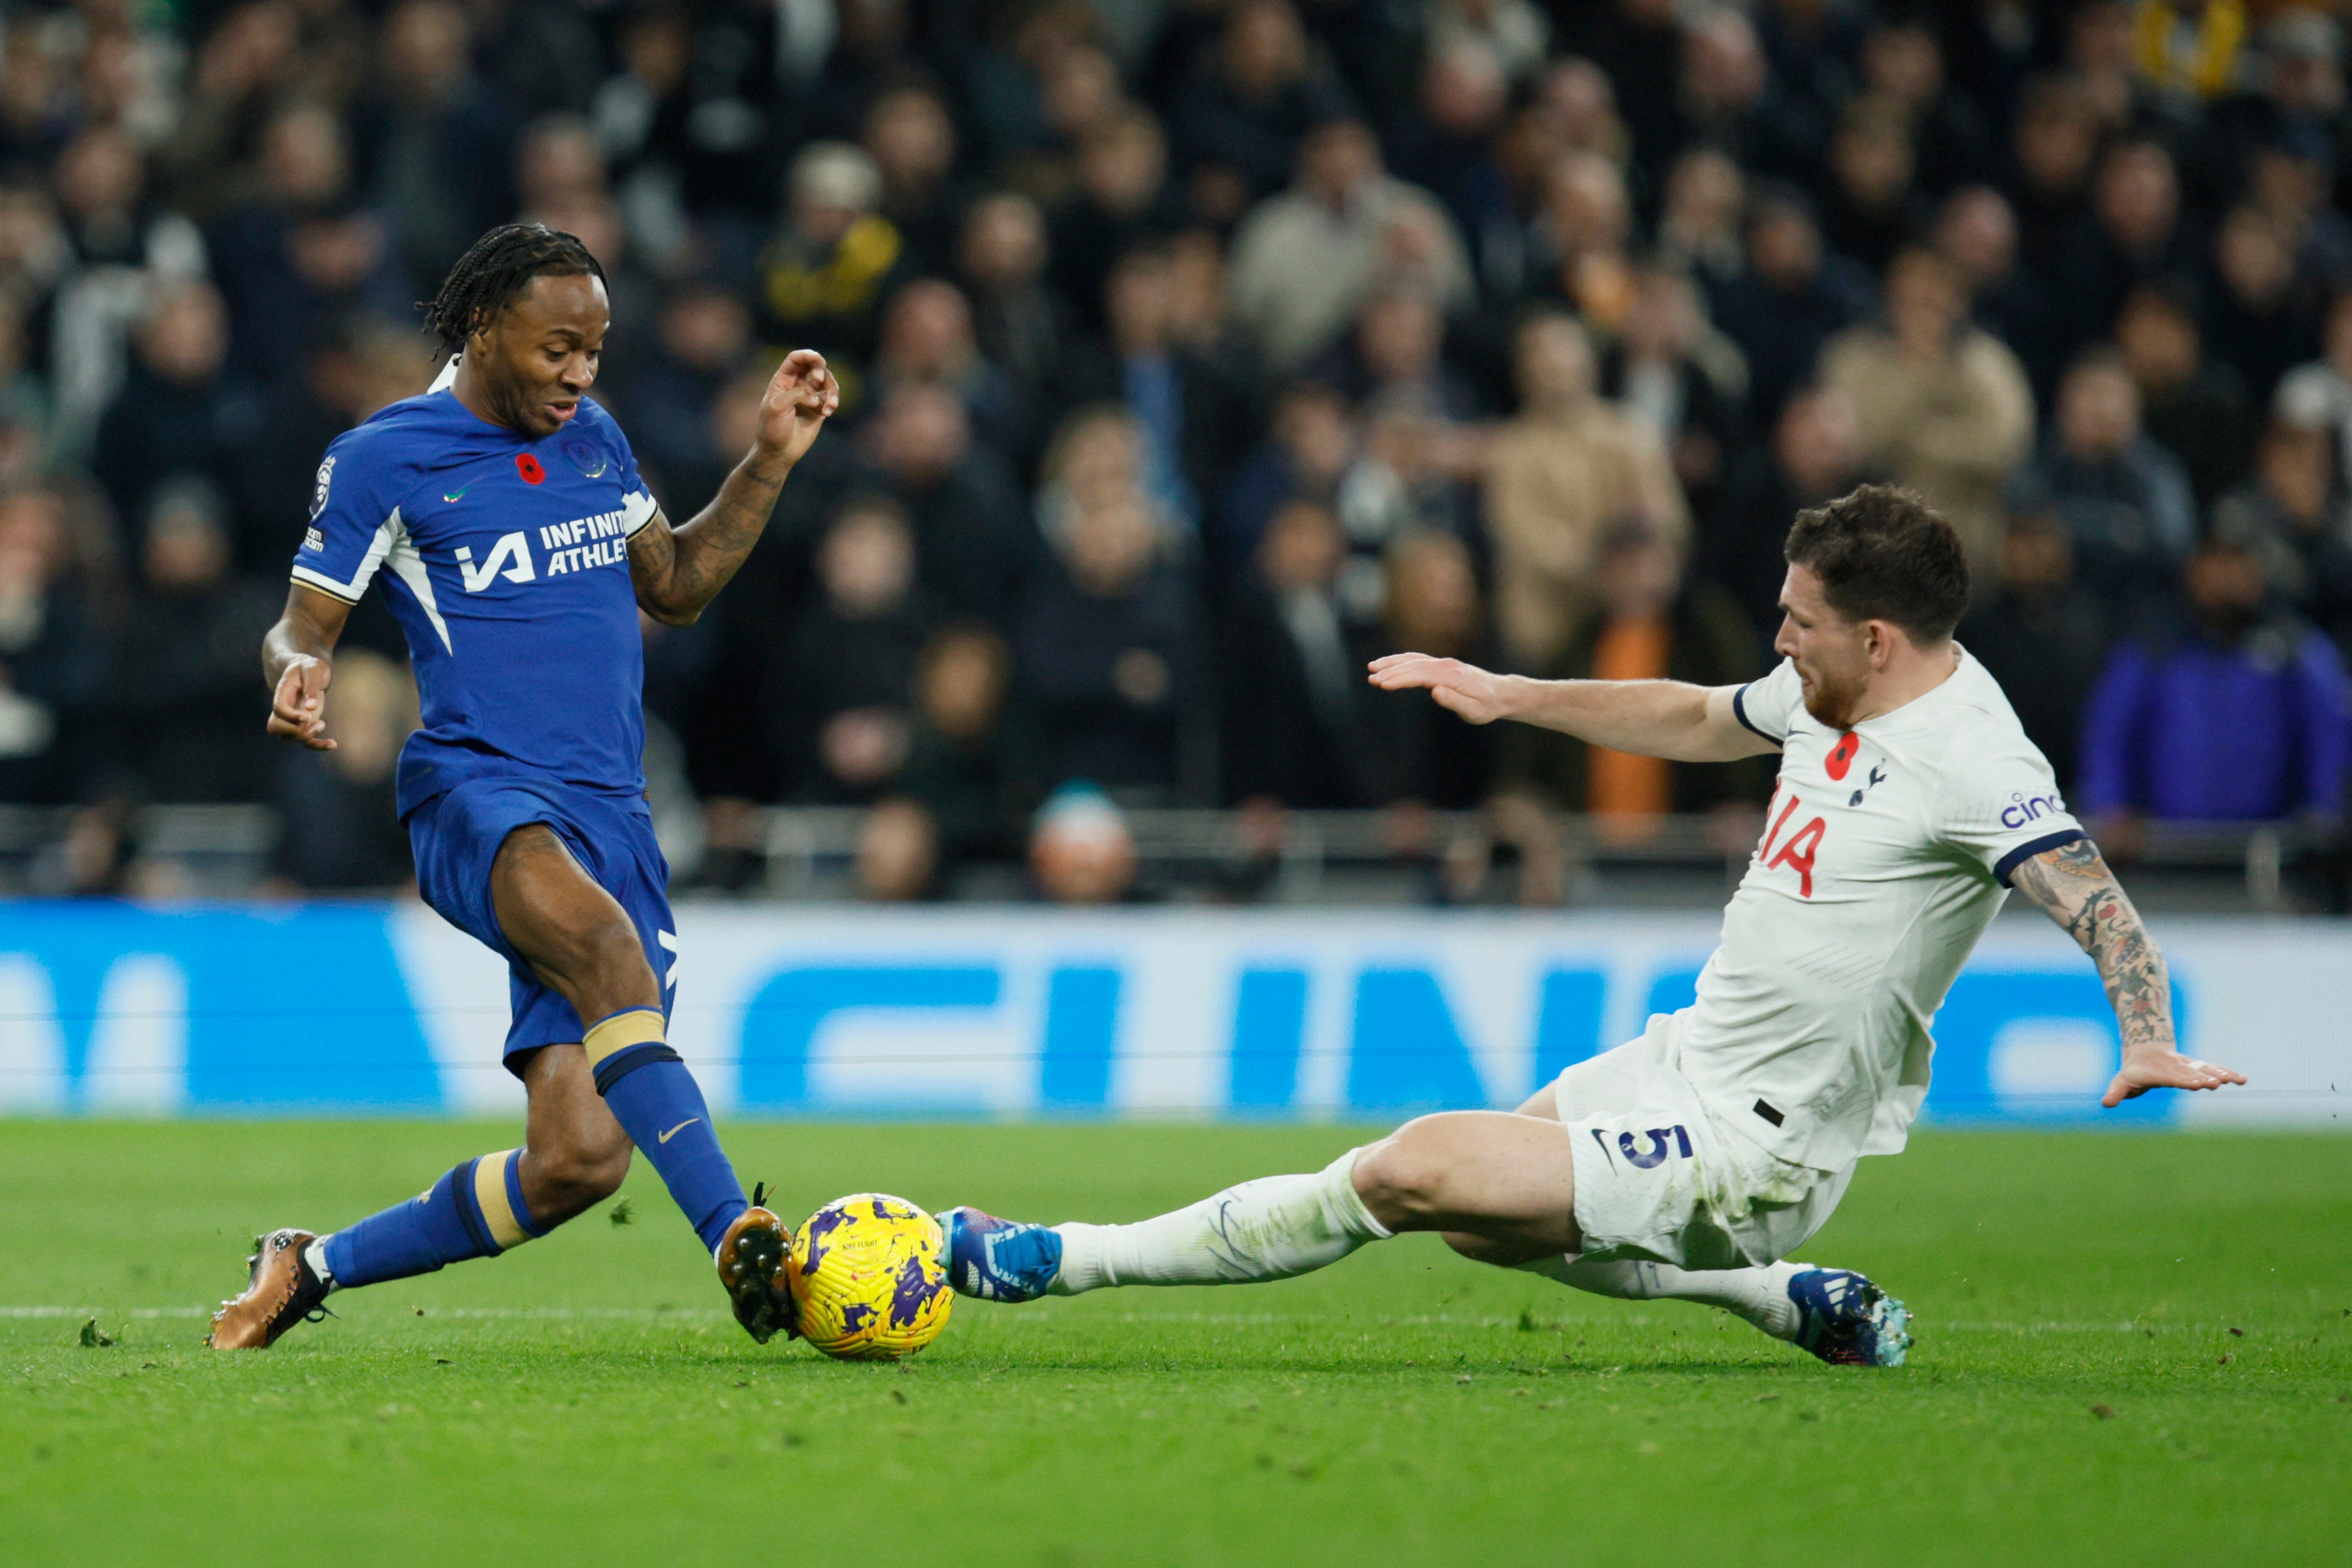 Raheem Sterling was the key to unlocking Tottenham’s defence, setting up Nicolas Jackson to score Chelsea’s second goal